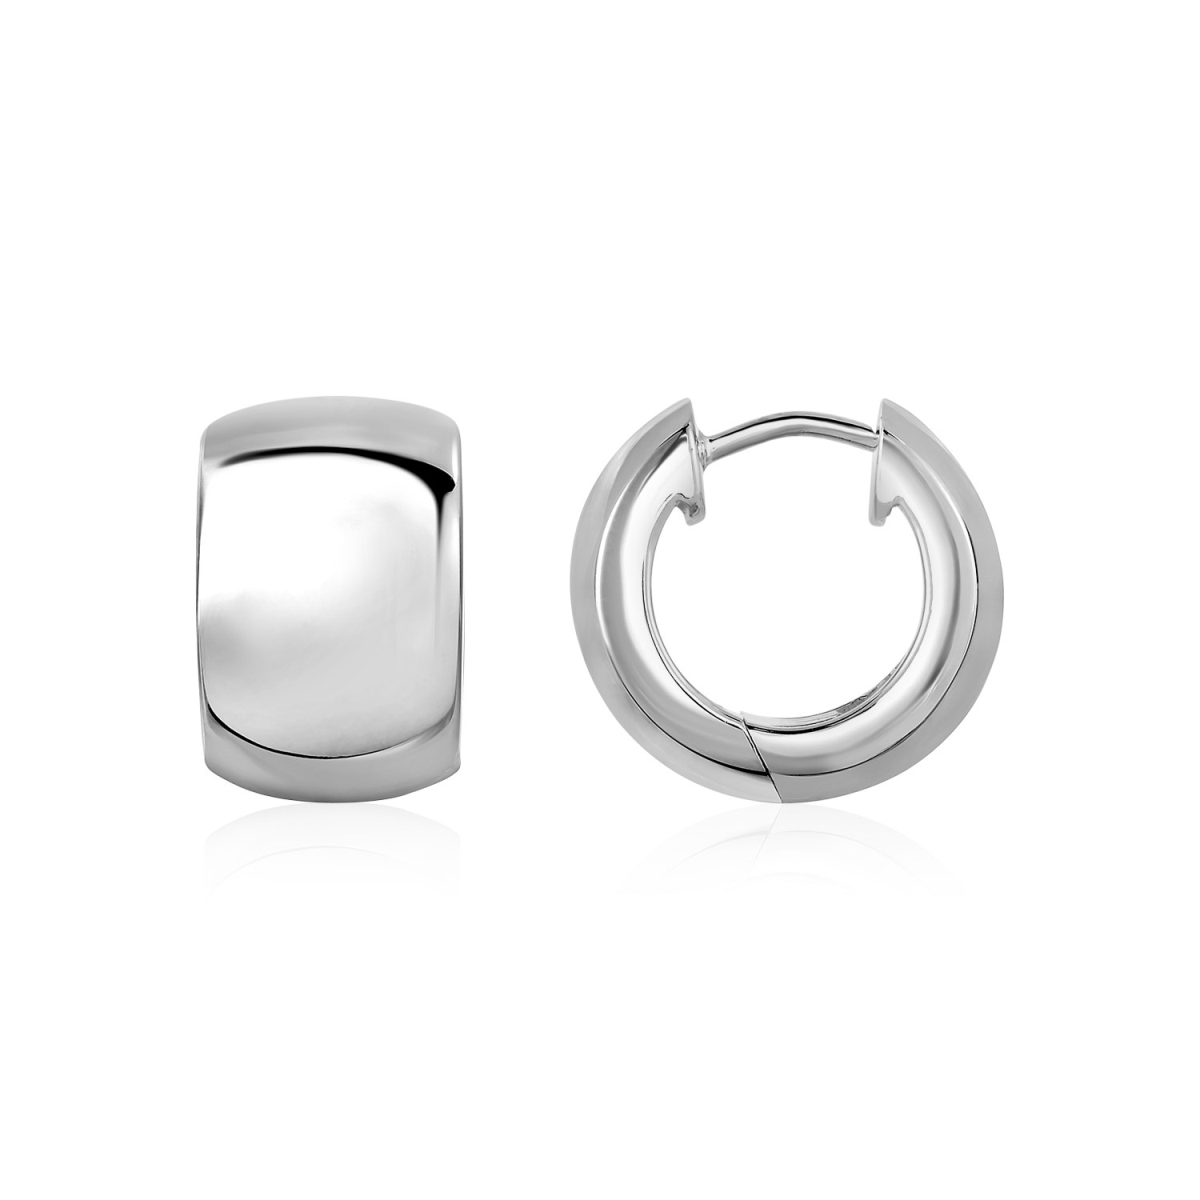 Picture of Iconic Jewels D40280531 Polished Round Hoop Earrings in Sterling Silver